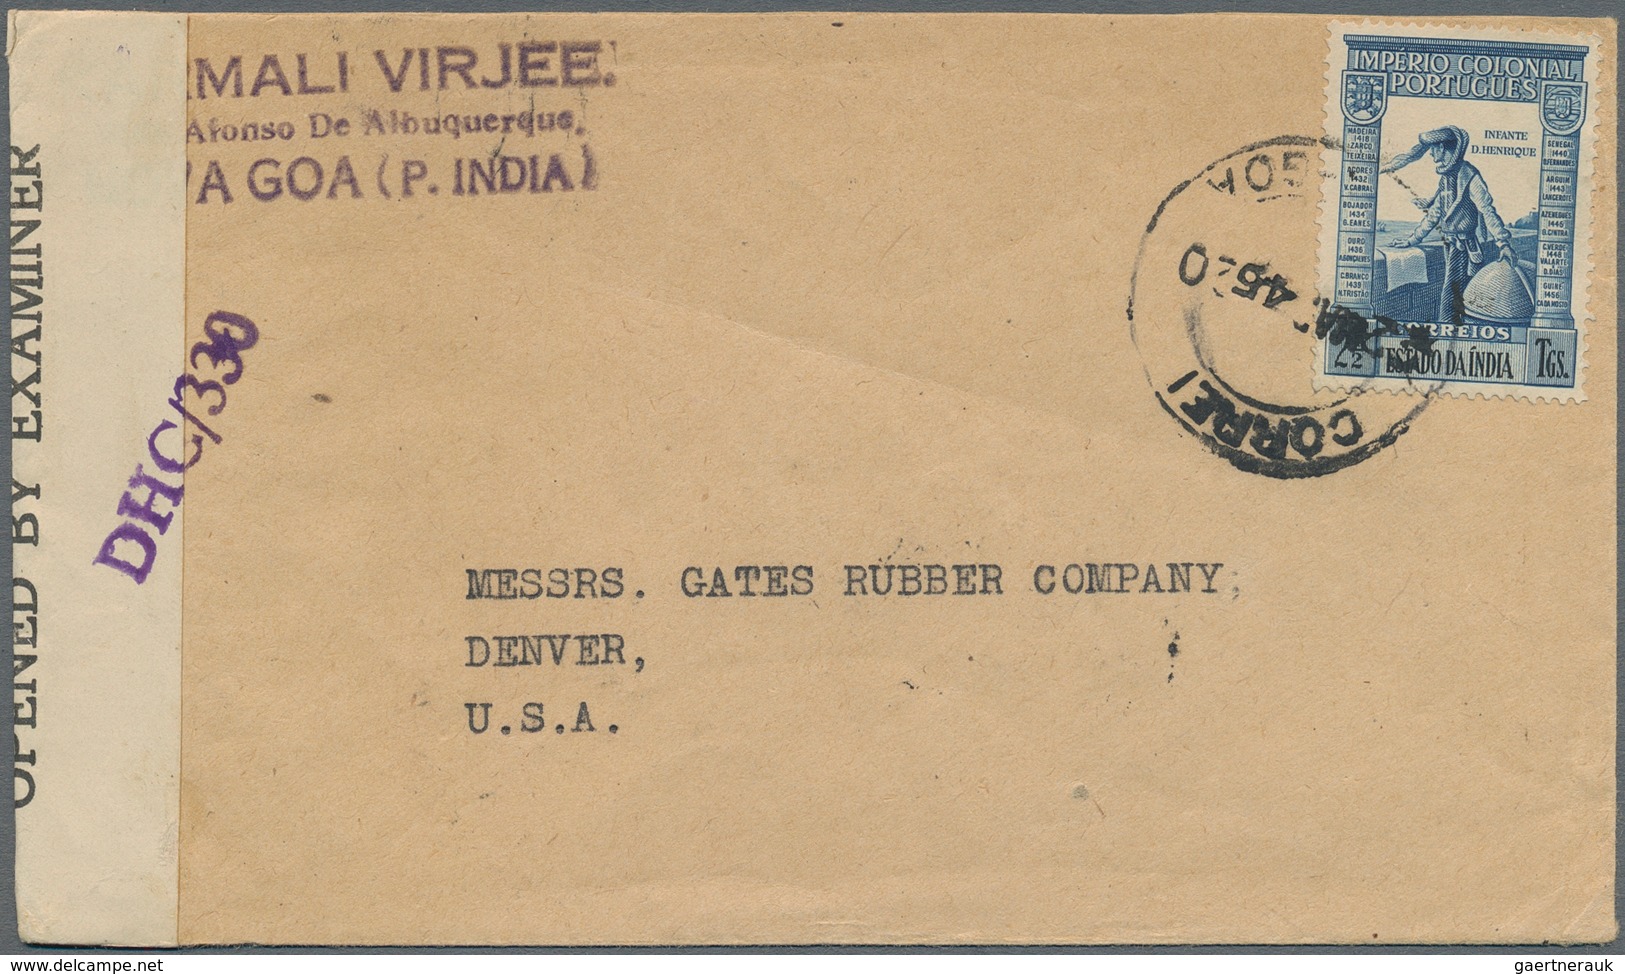 Portugiesisch-Indien: 1945, Two Censored Covers: 1) Registered Commercial Airmail From "NOVA GOA 2-8 - Portuguese India